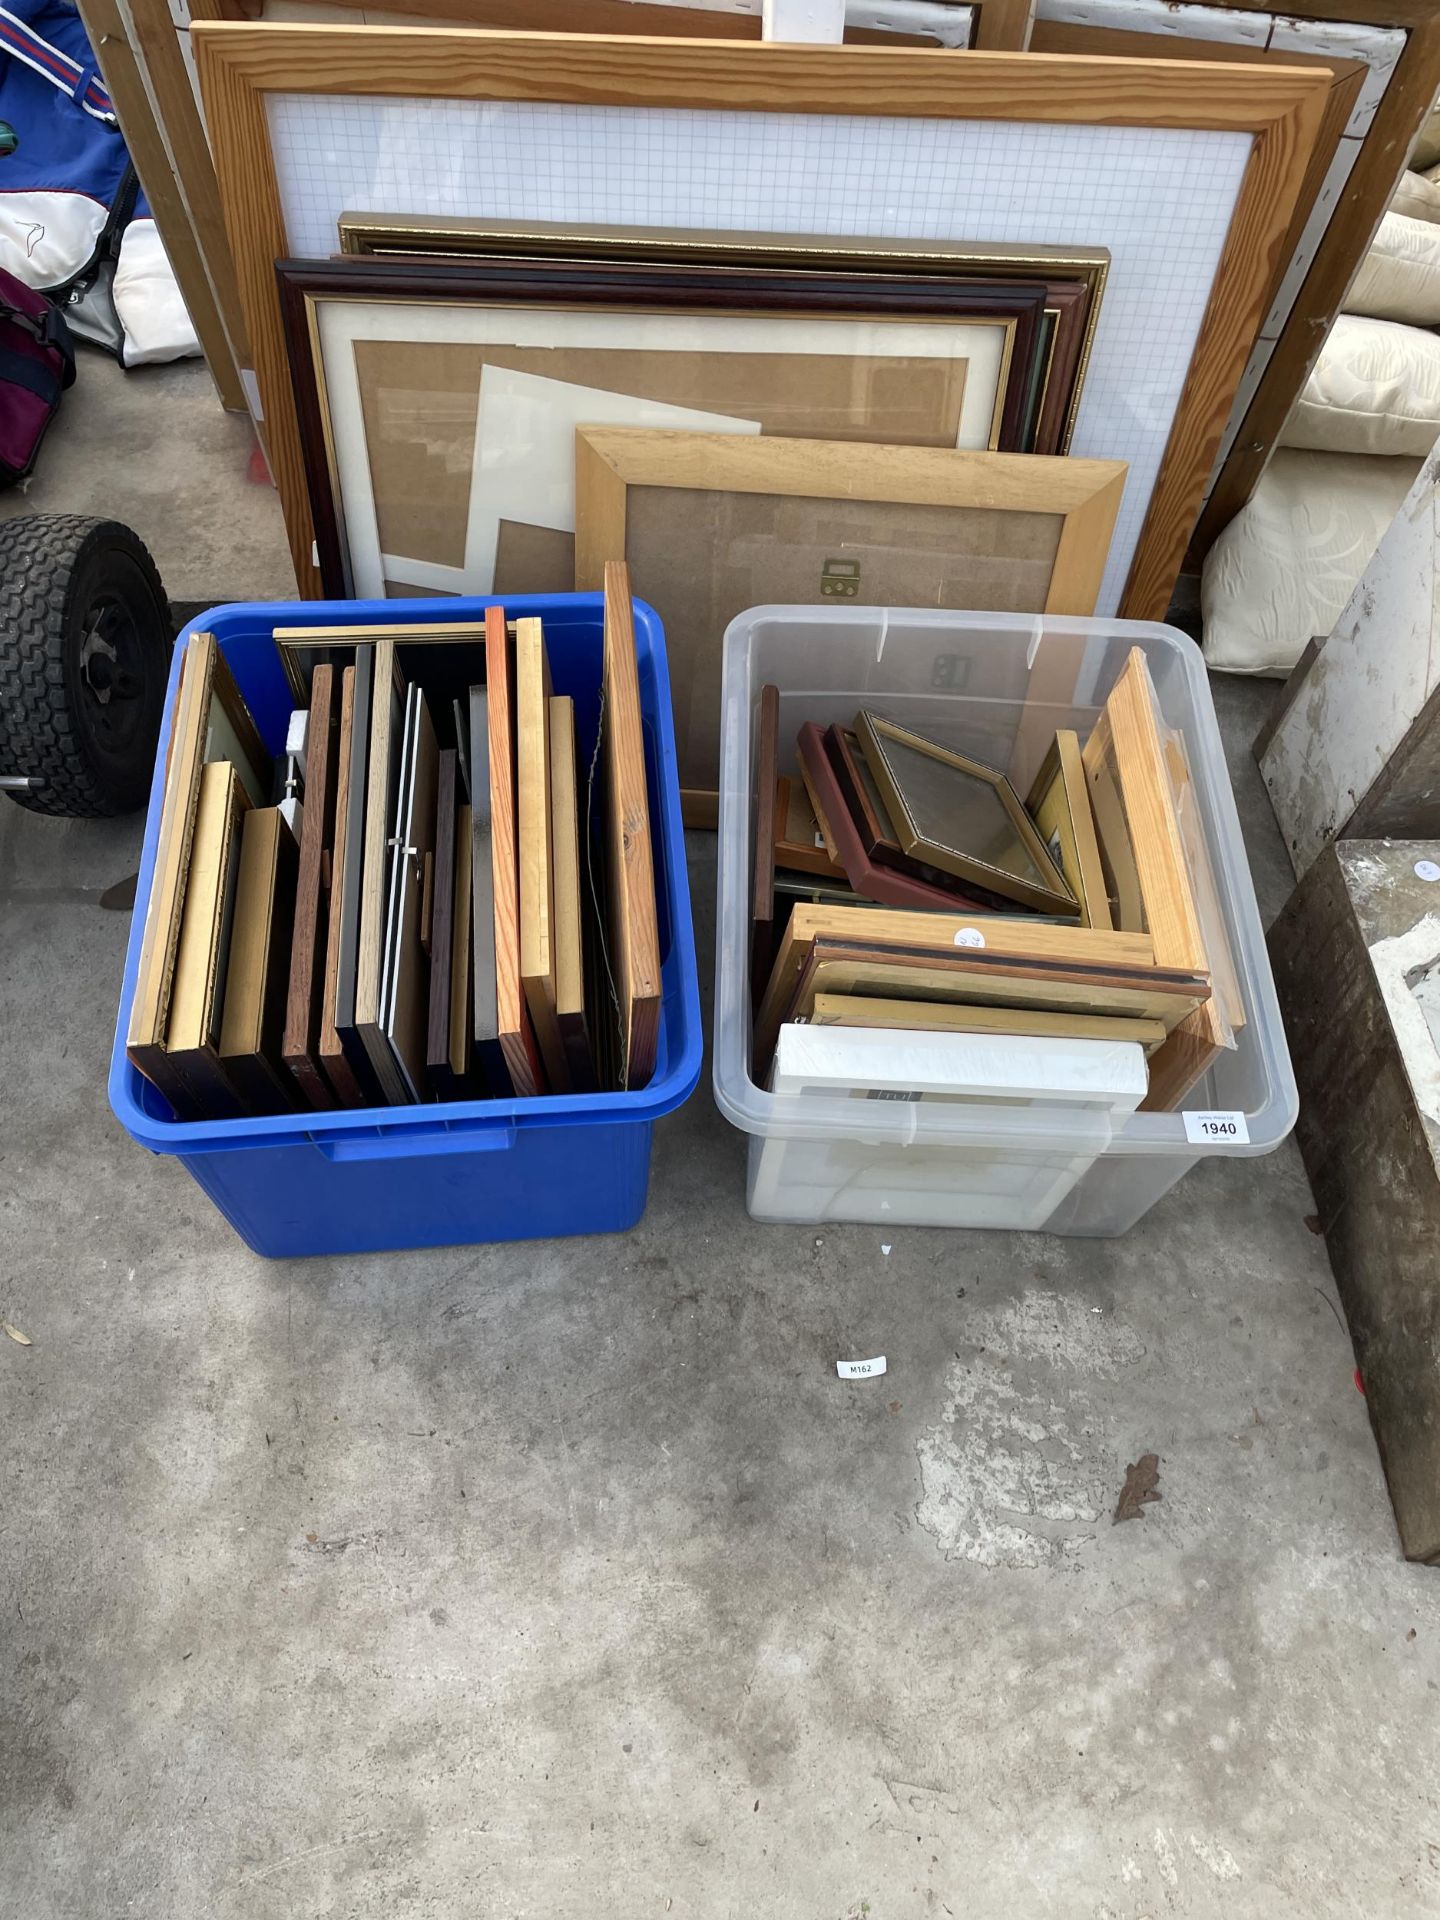 A LARGE QUANTITY OF EMPTY PICTURE FRAMES